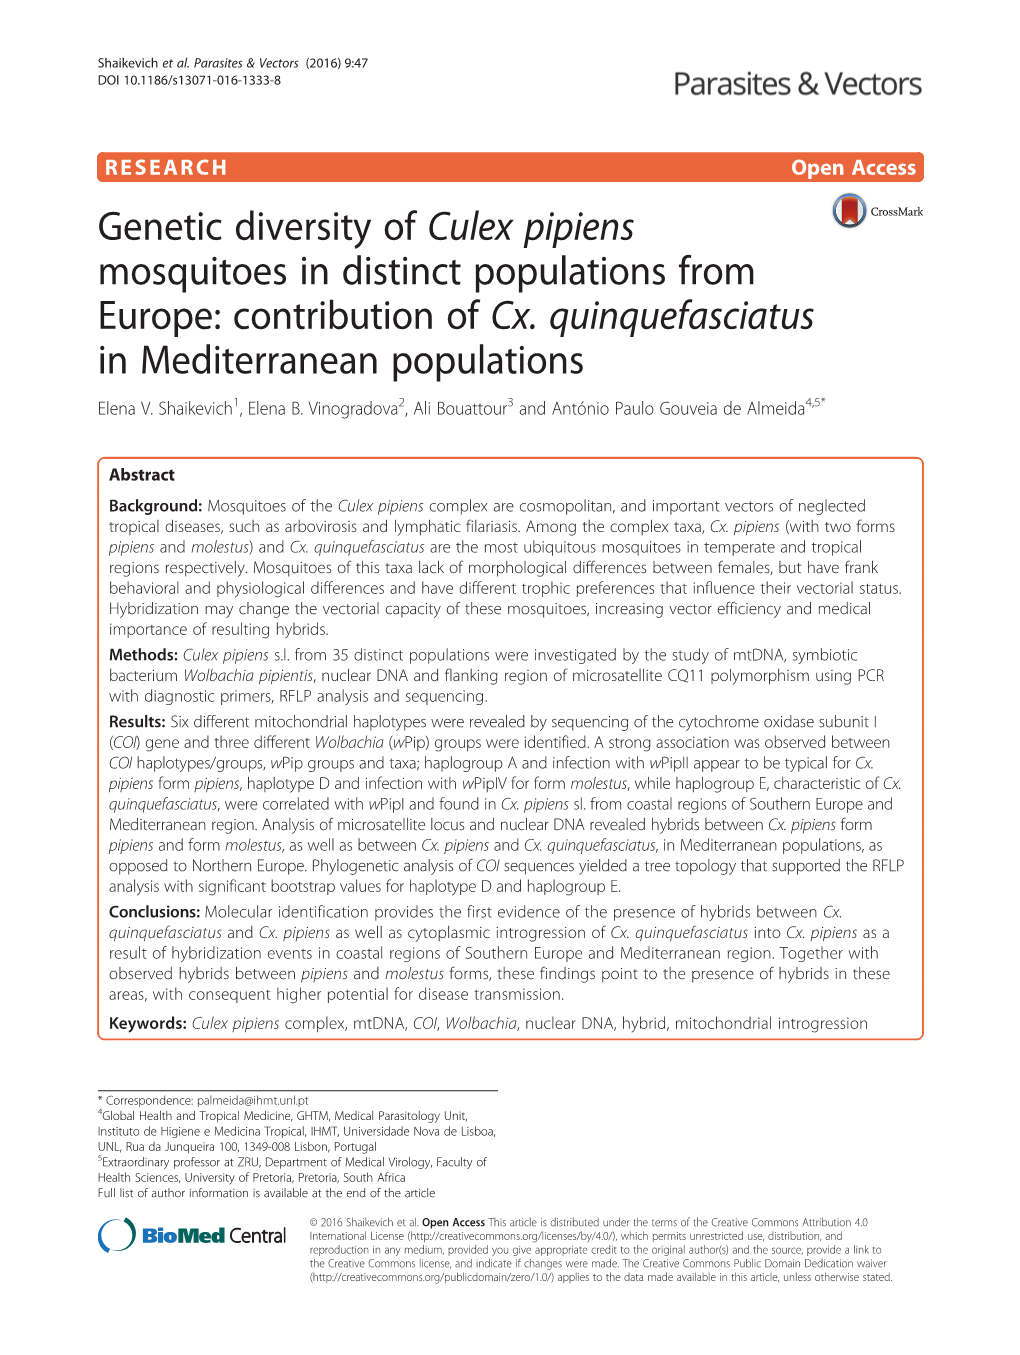 Genetic Diversity of Culex Pipiens Mosquitoes in Distinct Populations from Europe: Contribution of Cx